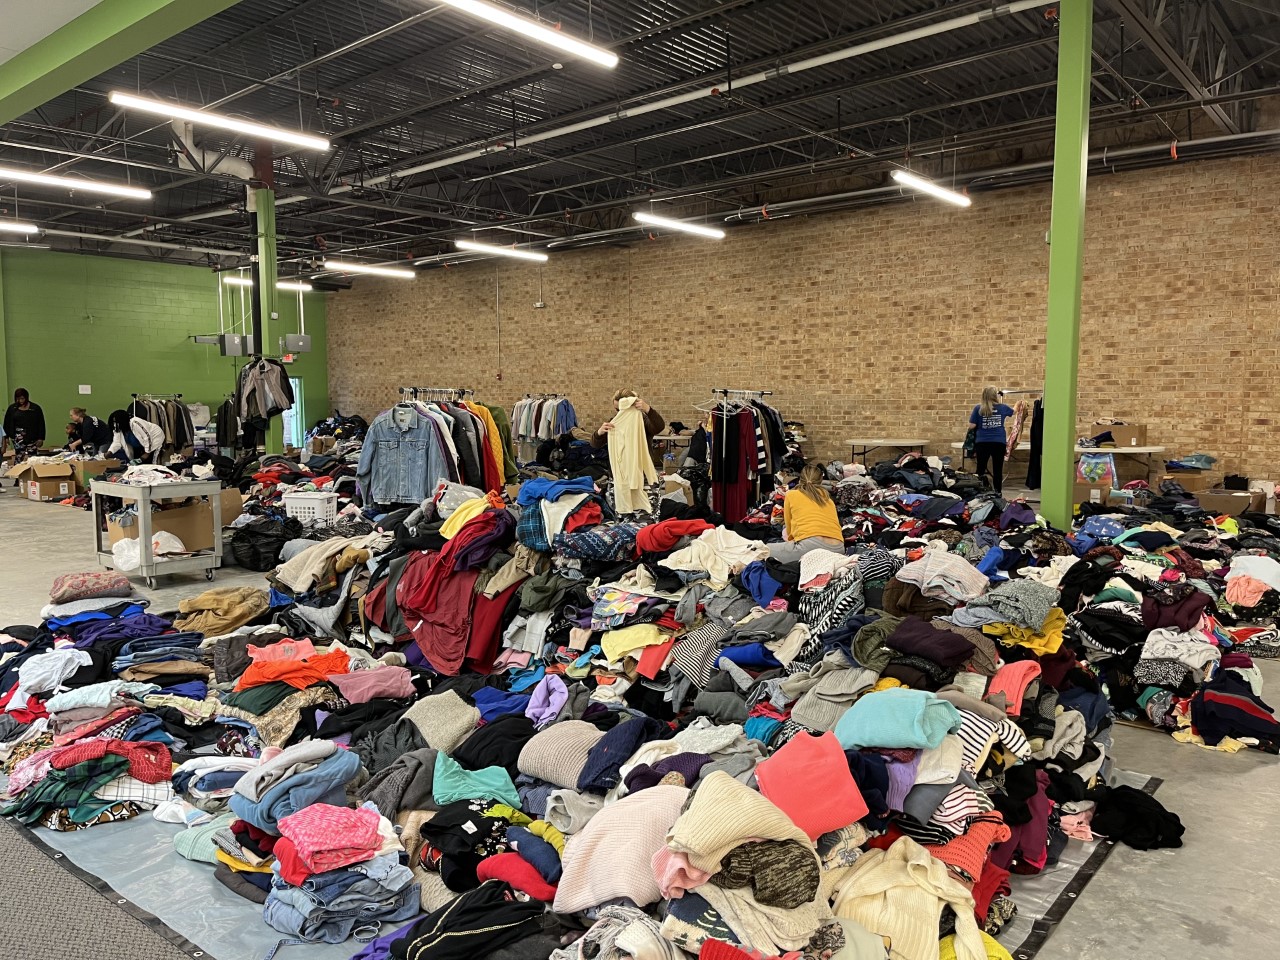 Business owners came together to organize donations to help families of a West Ashley apartment fire earlier this month. (Photo/Teri Errico Griffis)